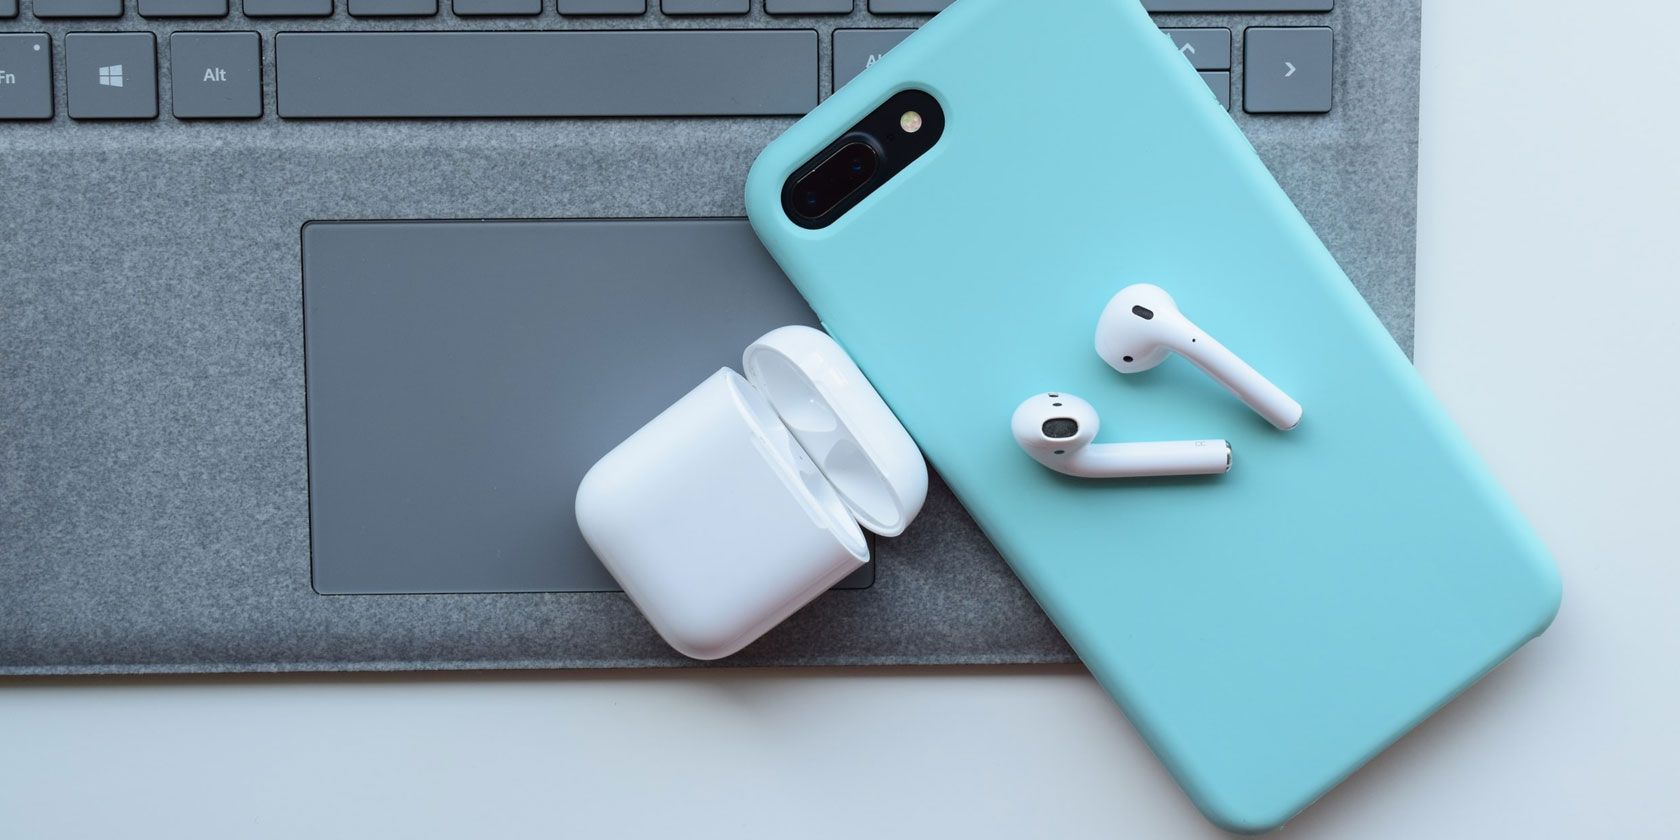 AirPods on top of an iPhone and laptop